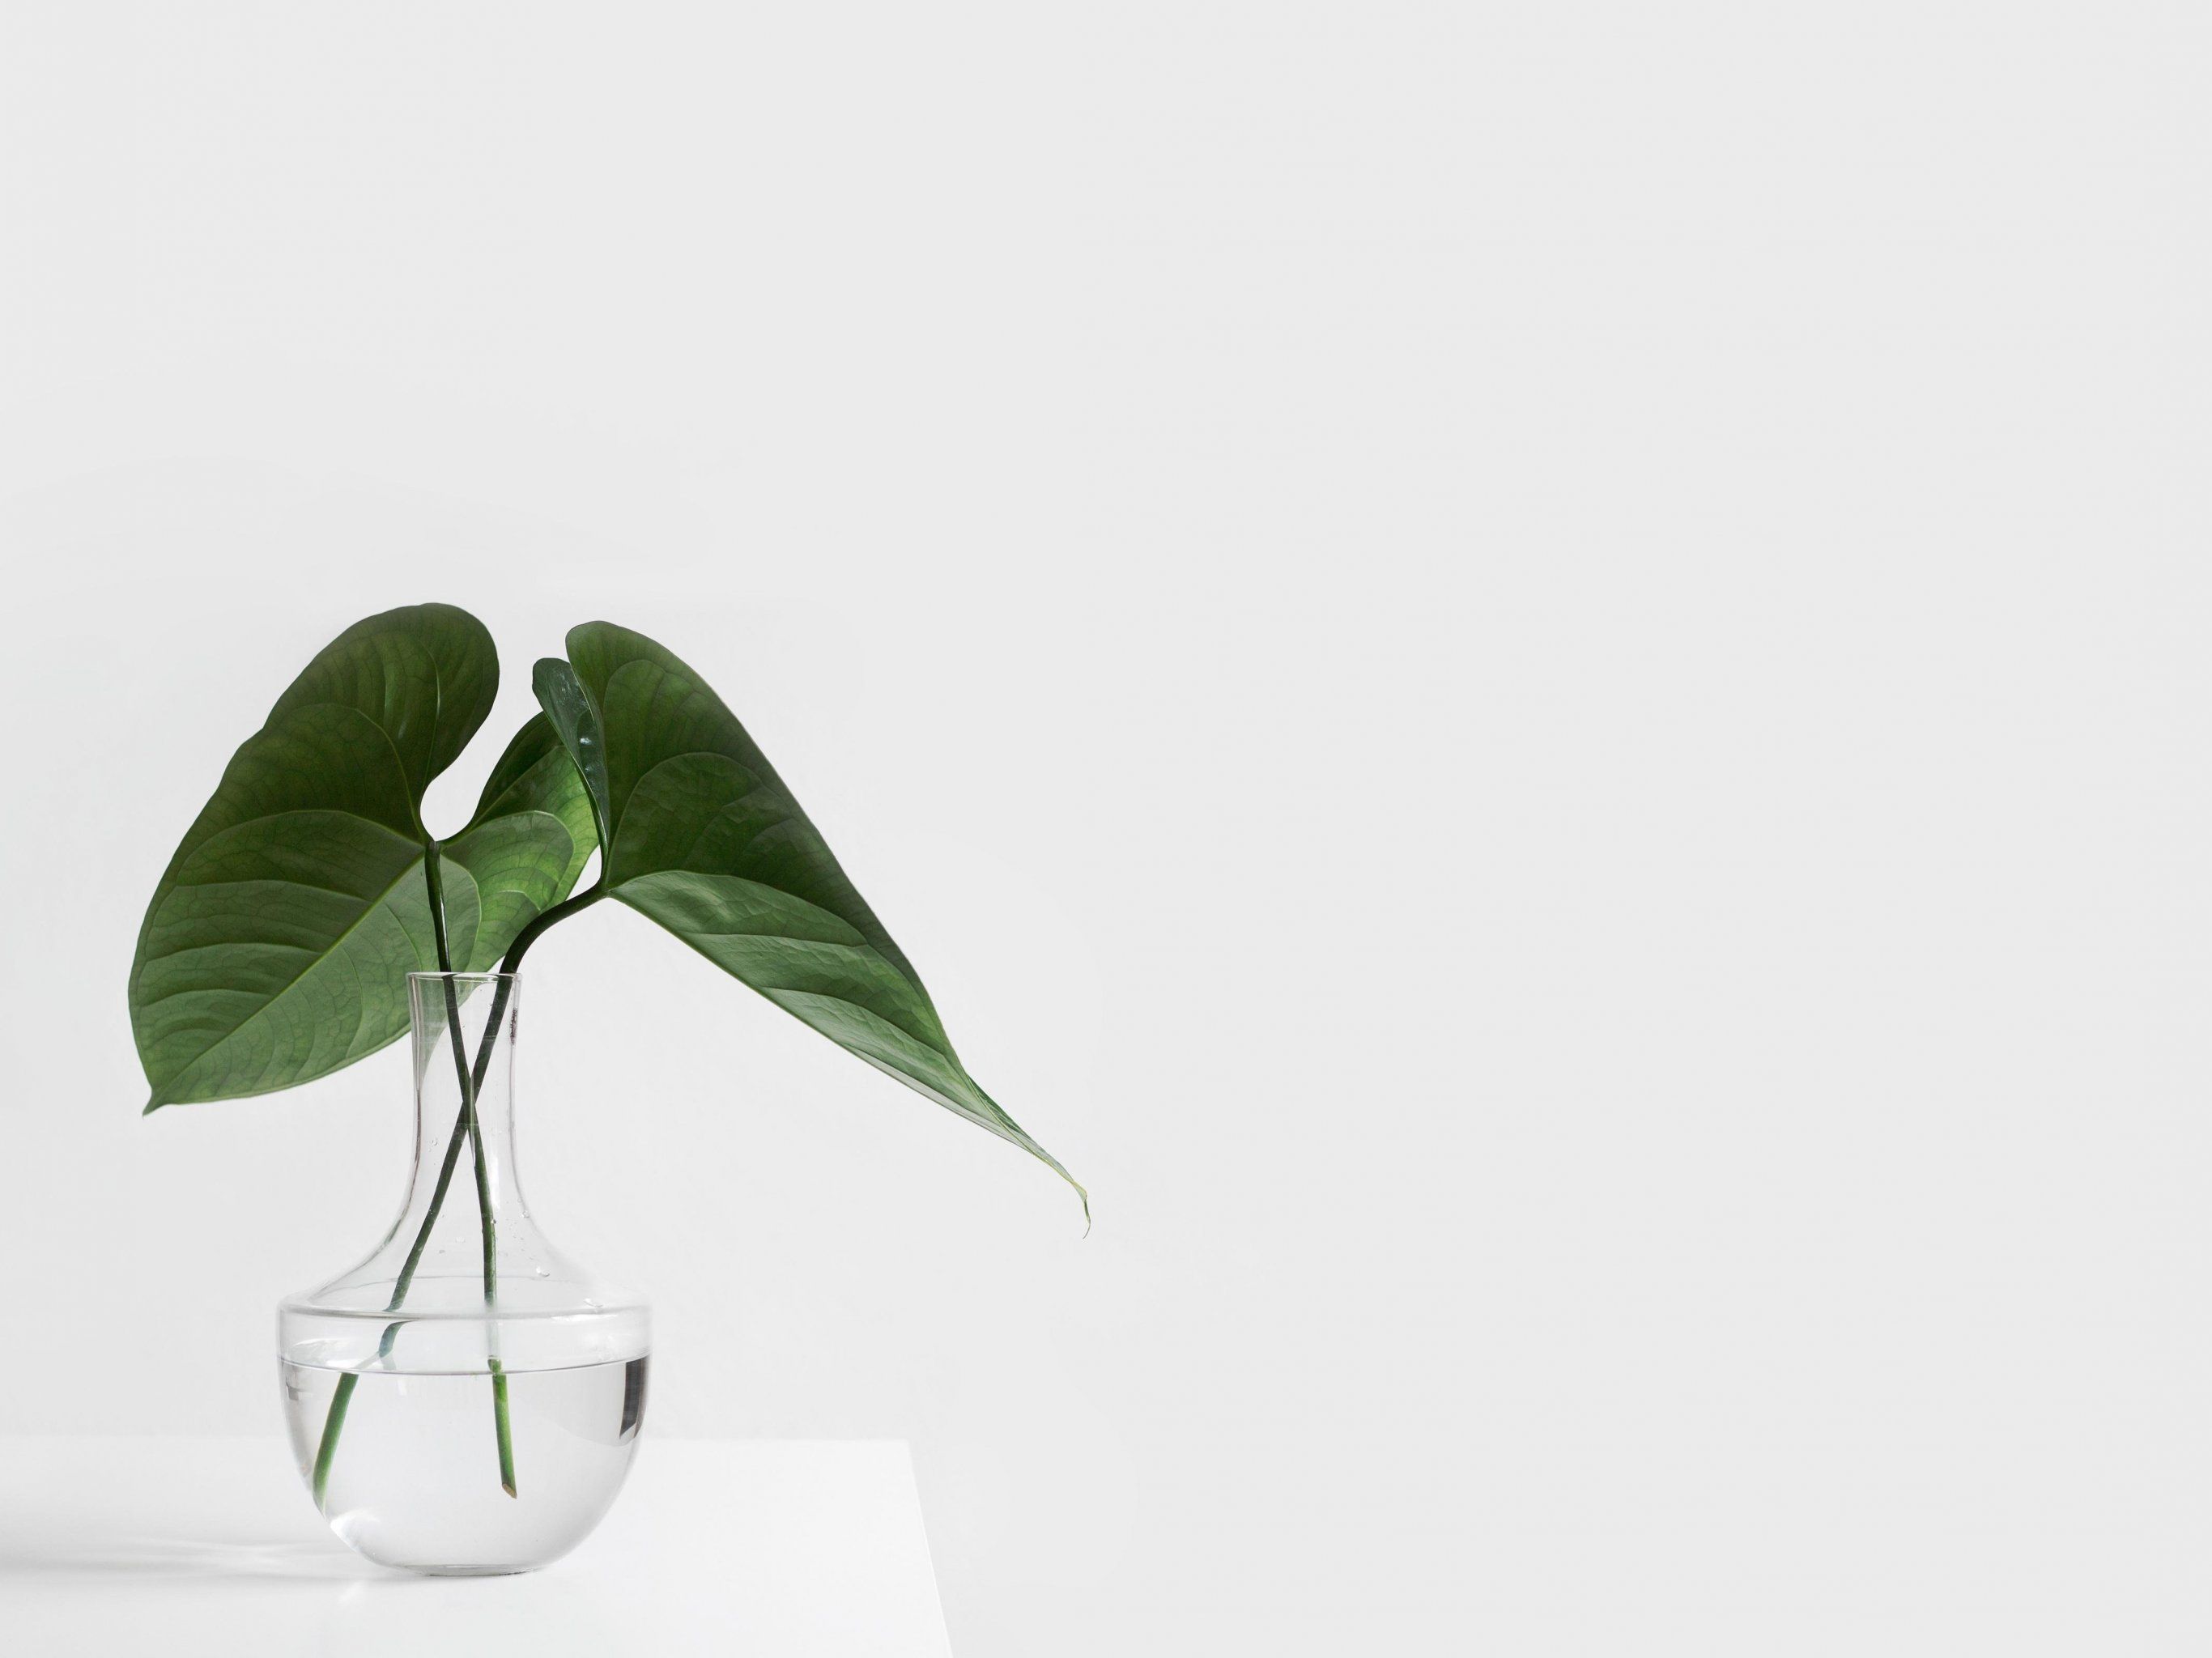 Minimalist Aesthetic Plant in Clear Vase Wallpaper, Android & Desktop Background